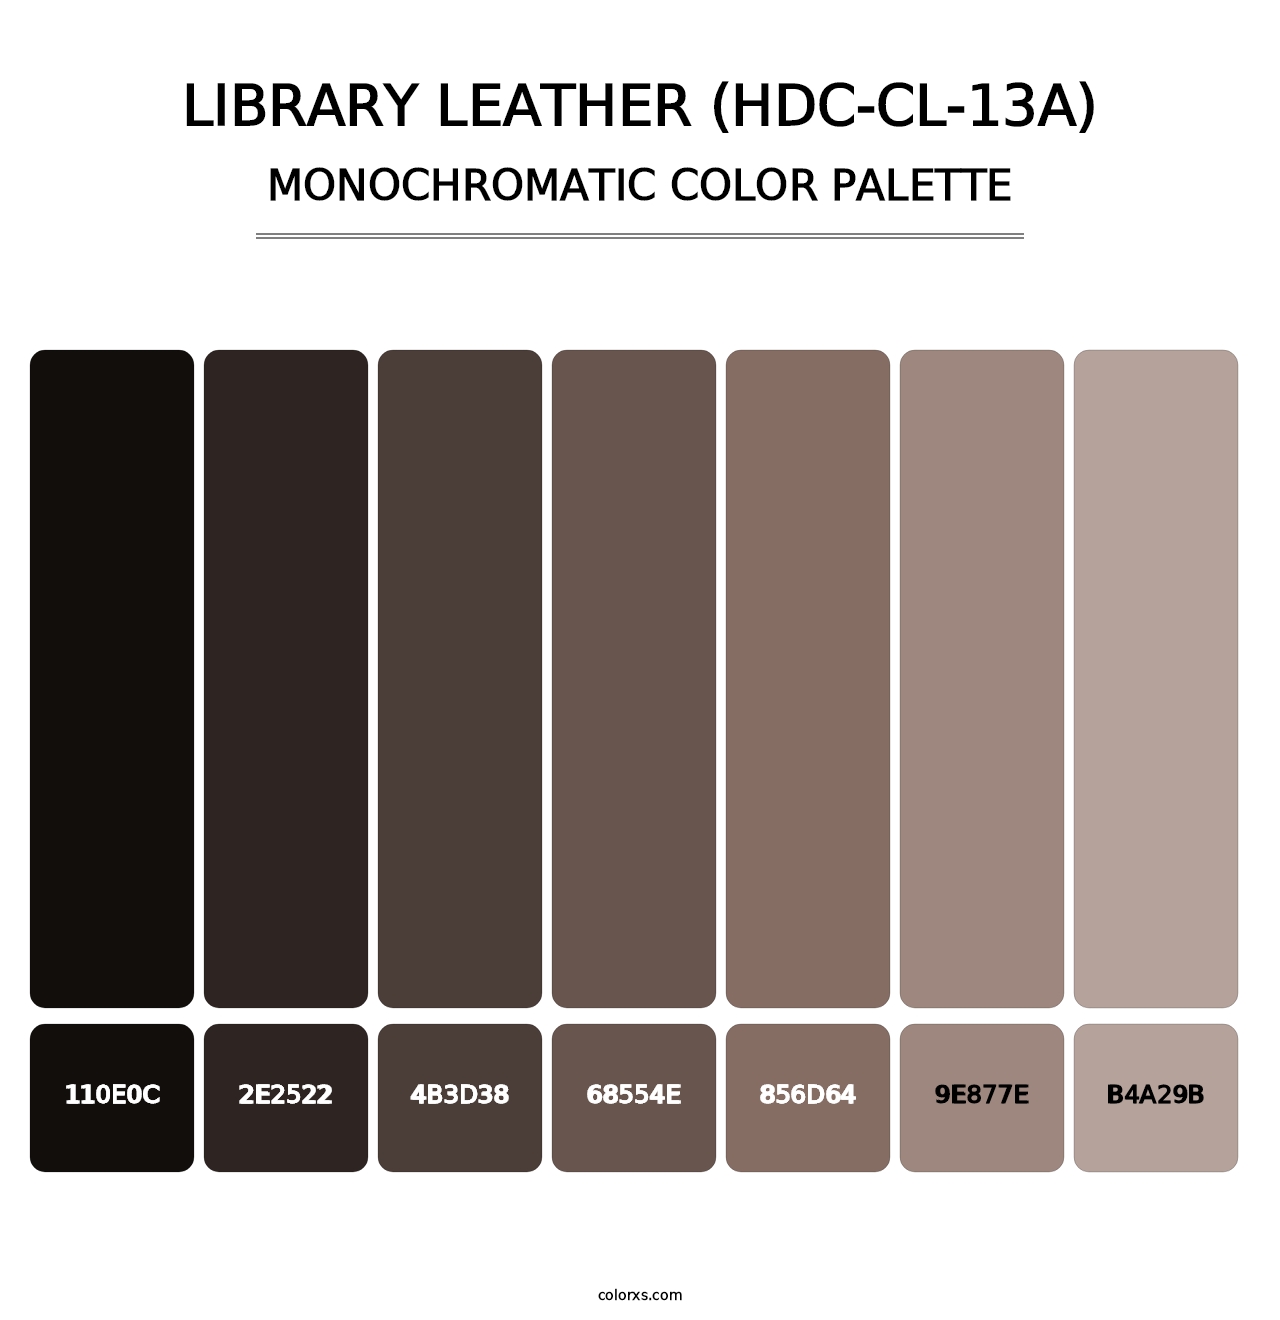 Library Leather (HDC-CL-13A) - Monochromatic Color Palette